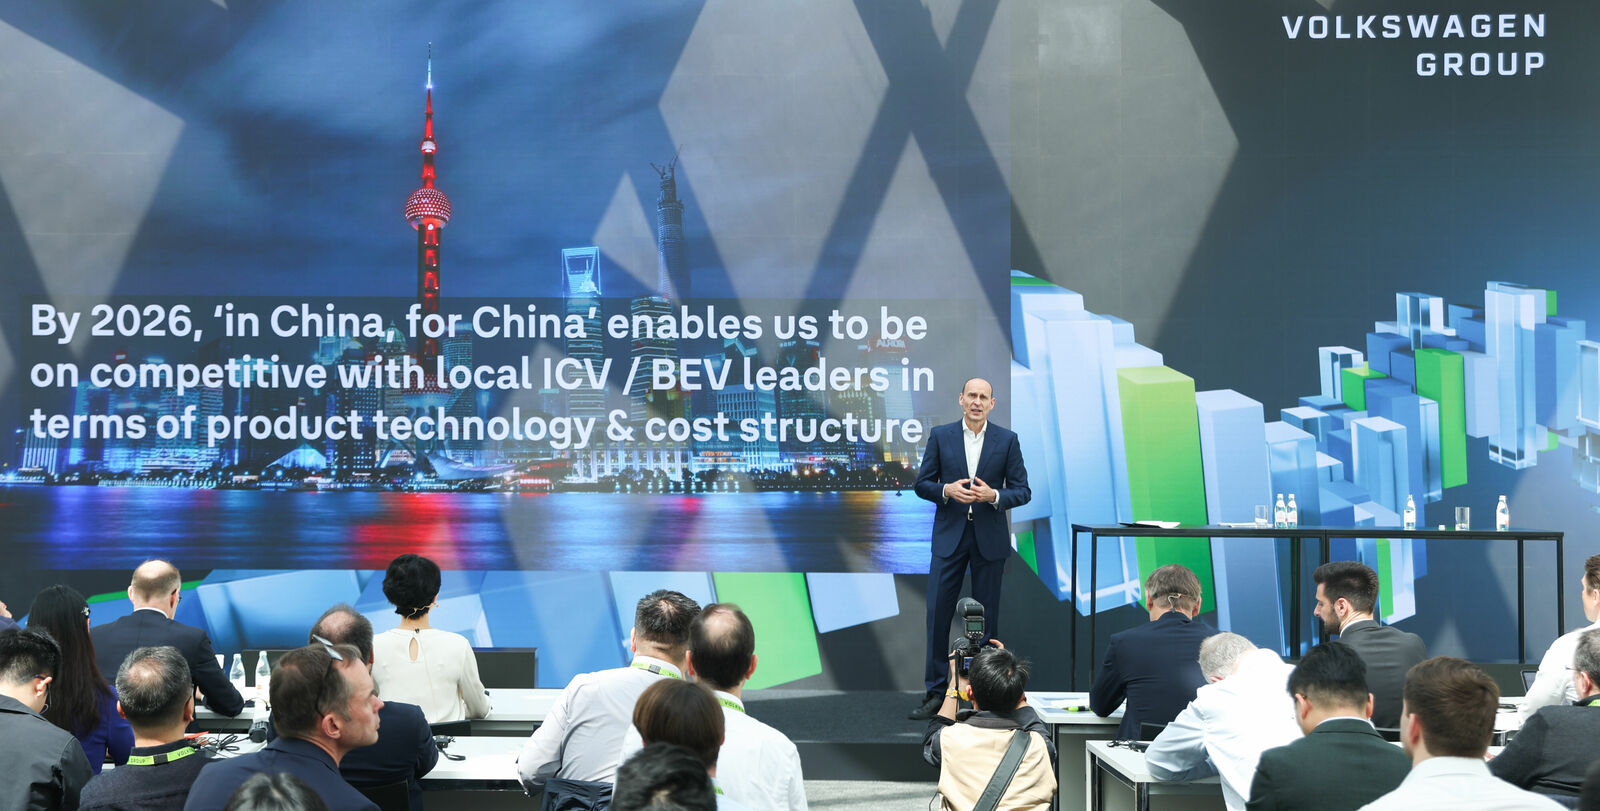 Ralf Brandstätter, Member of the board of Volkswagen AG for China, speaks at the China Capital Markets Day 2024 by the Volkswagen Group in Beijing